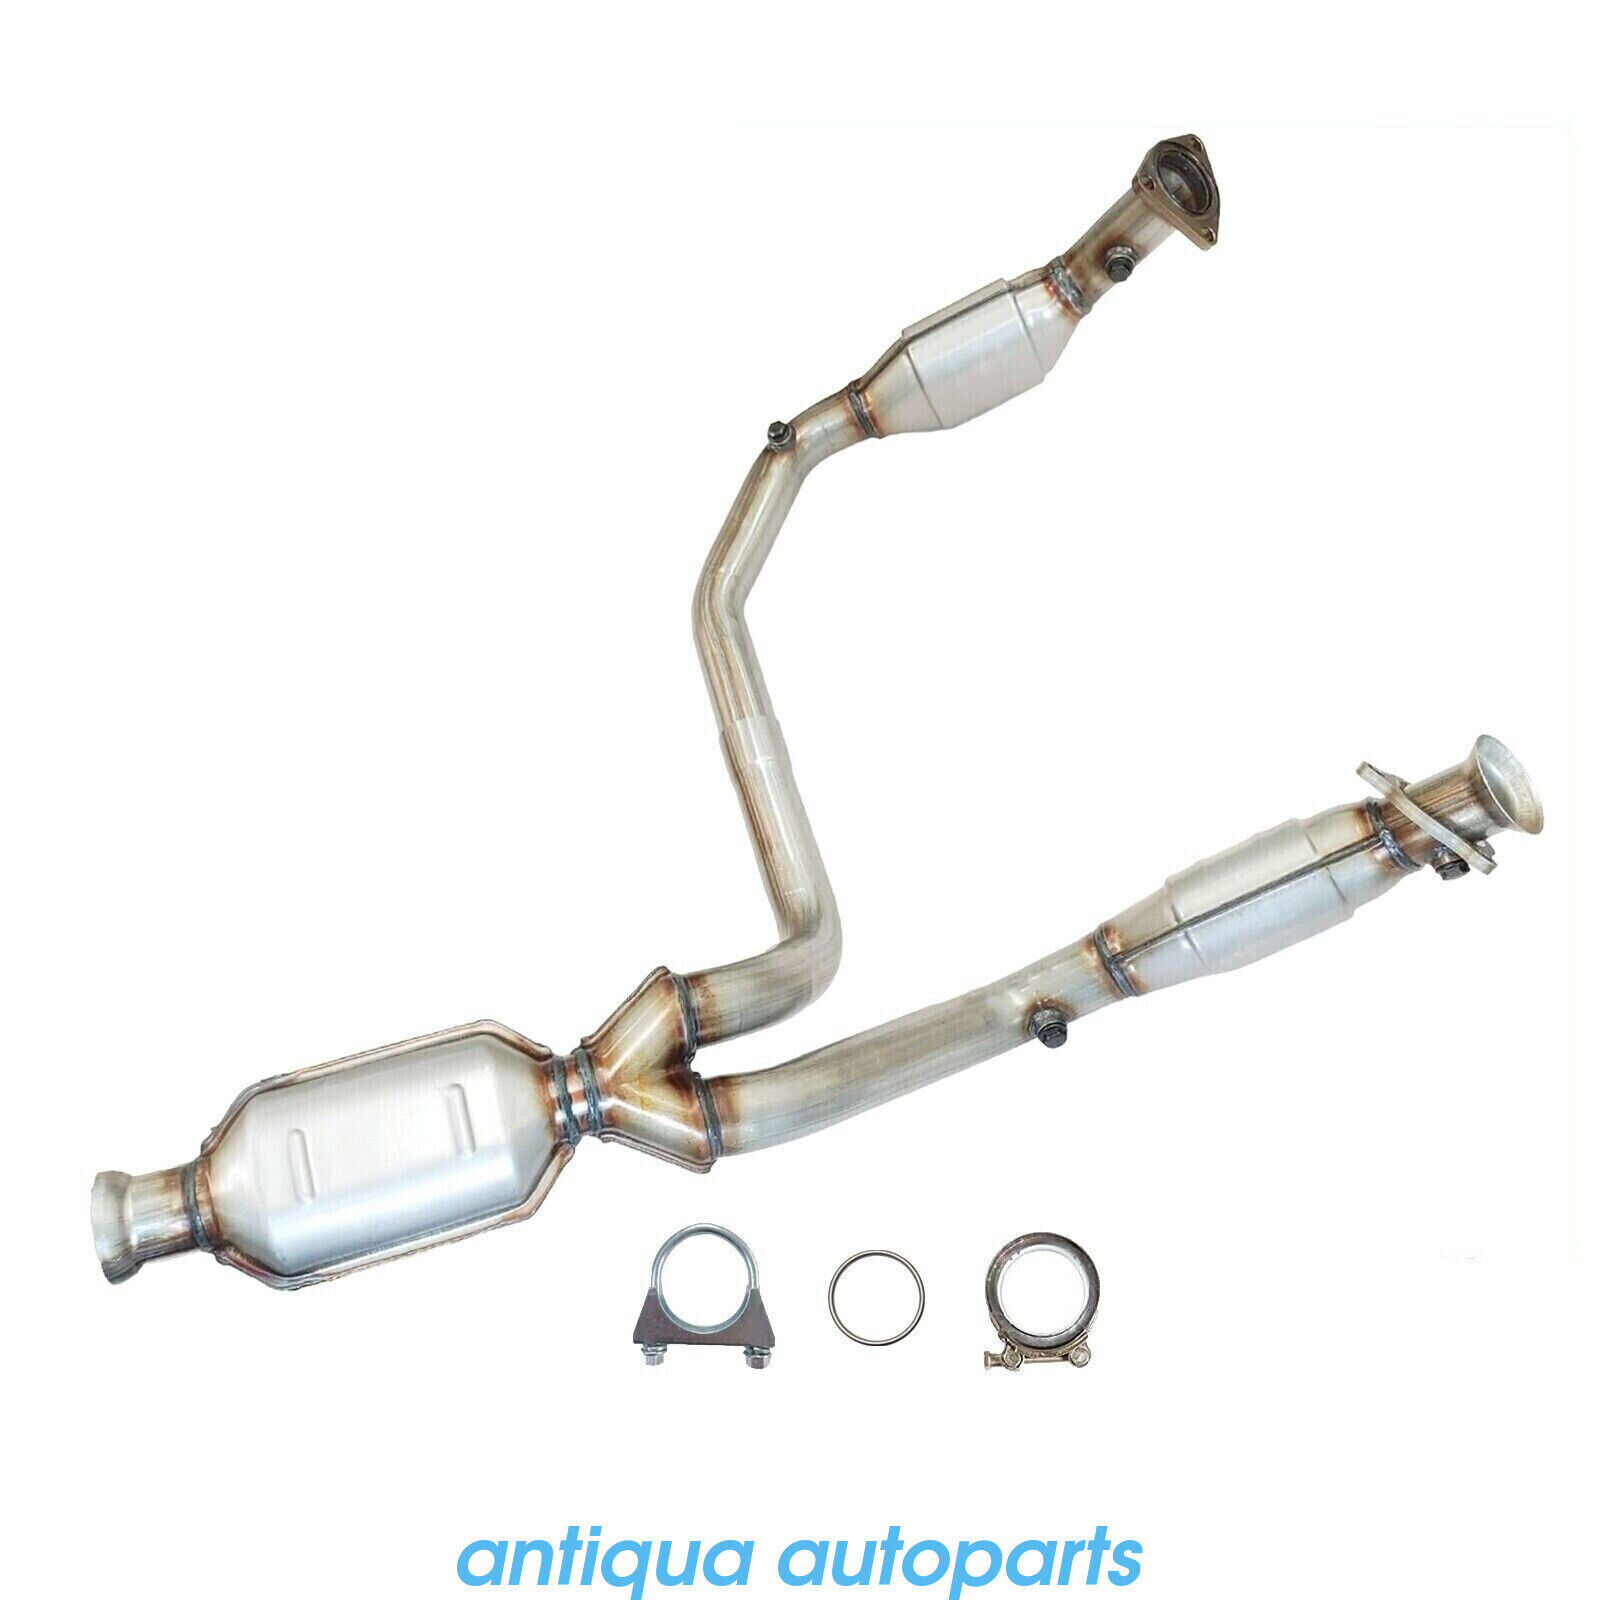 For Chevrolet GMC Cadillac 5.3L V8 Catalytic Converter 50490 Direct Fit EPA